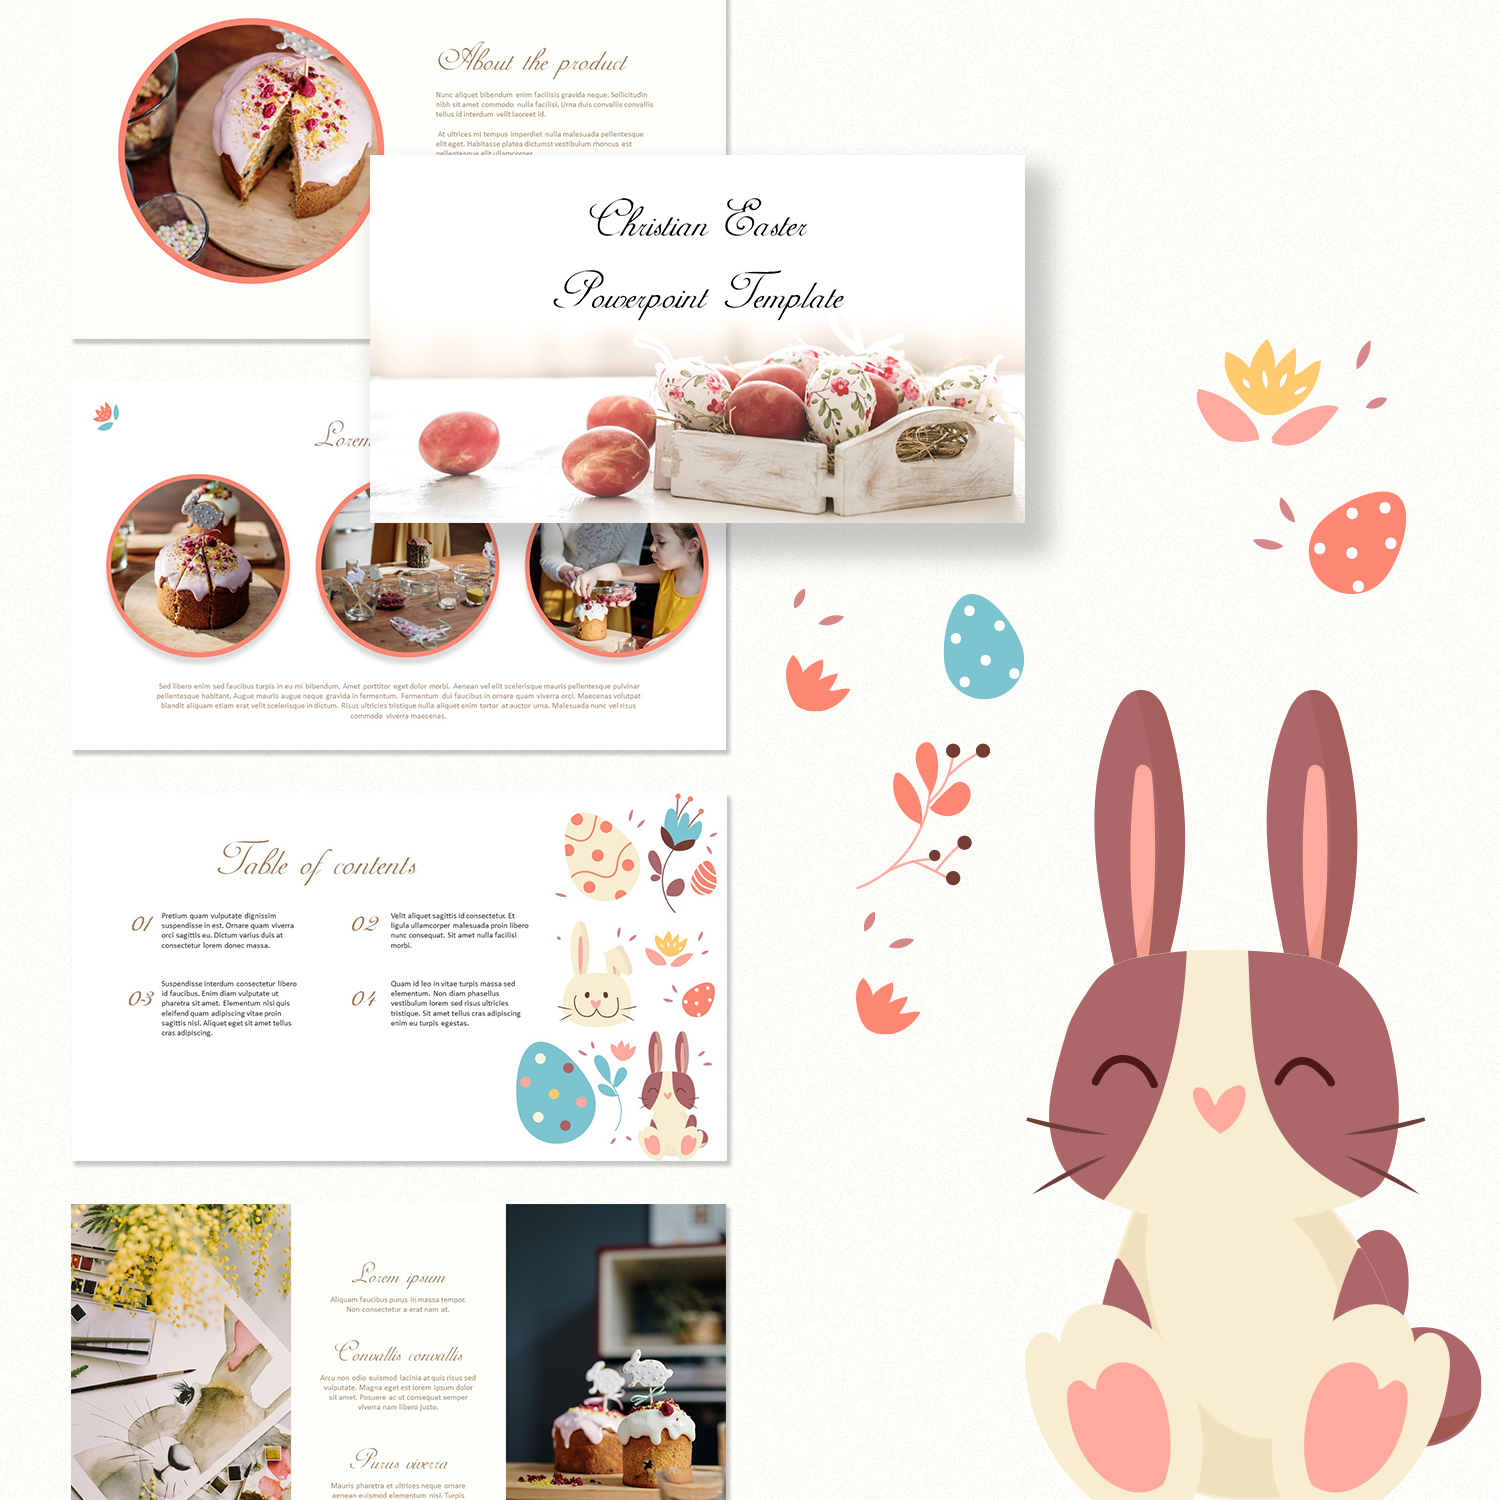 Set of adorable images with christian easter powerpoint template.